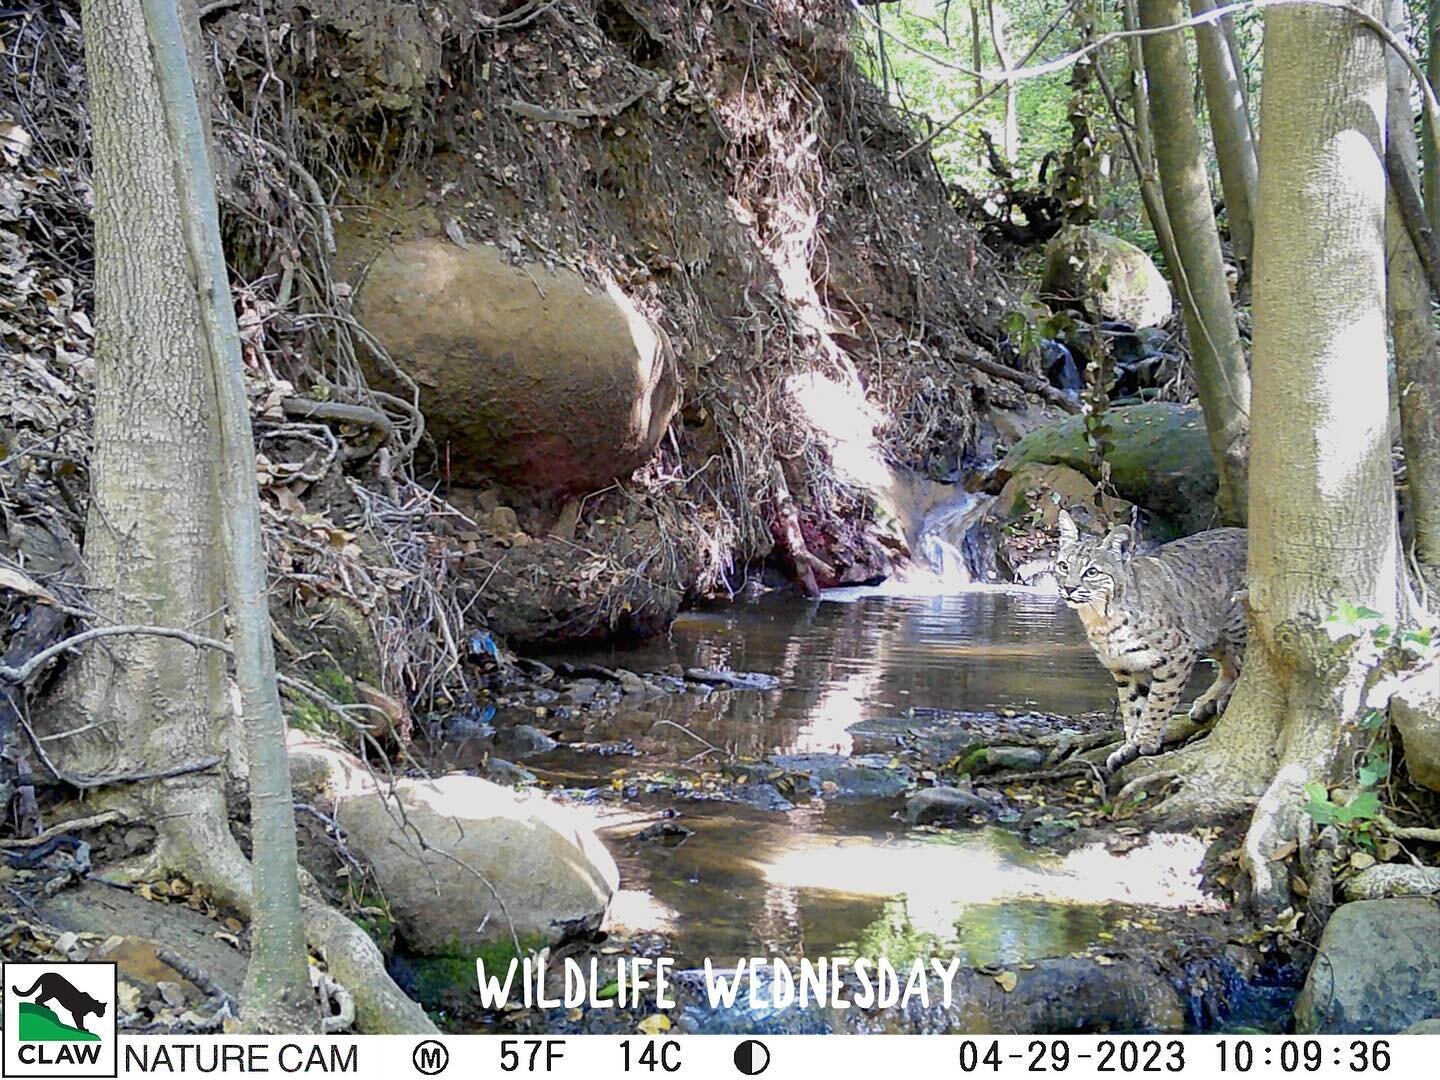 We couldn&rsquo;t have asked for a better picture! Natural streams are so important for many species! Not only are they natural habitats for many organisms, but they also provide hydration for wildlife passing by. Happy #wildlifewednesday ! #clawla